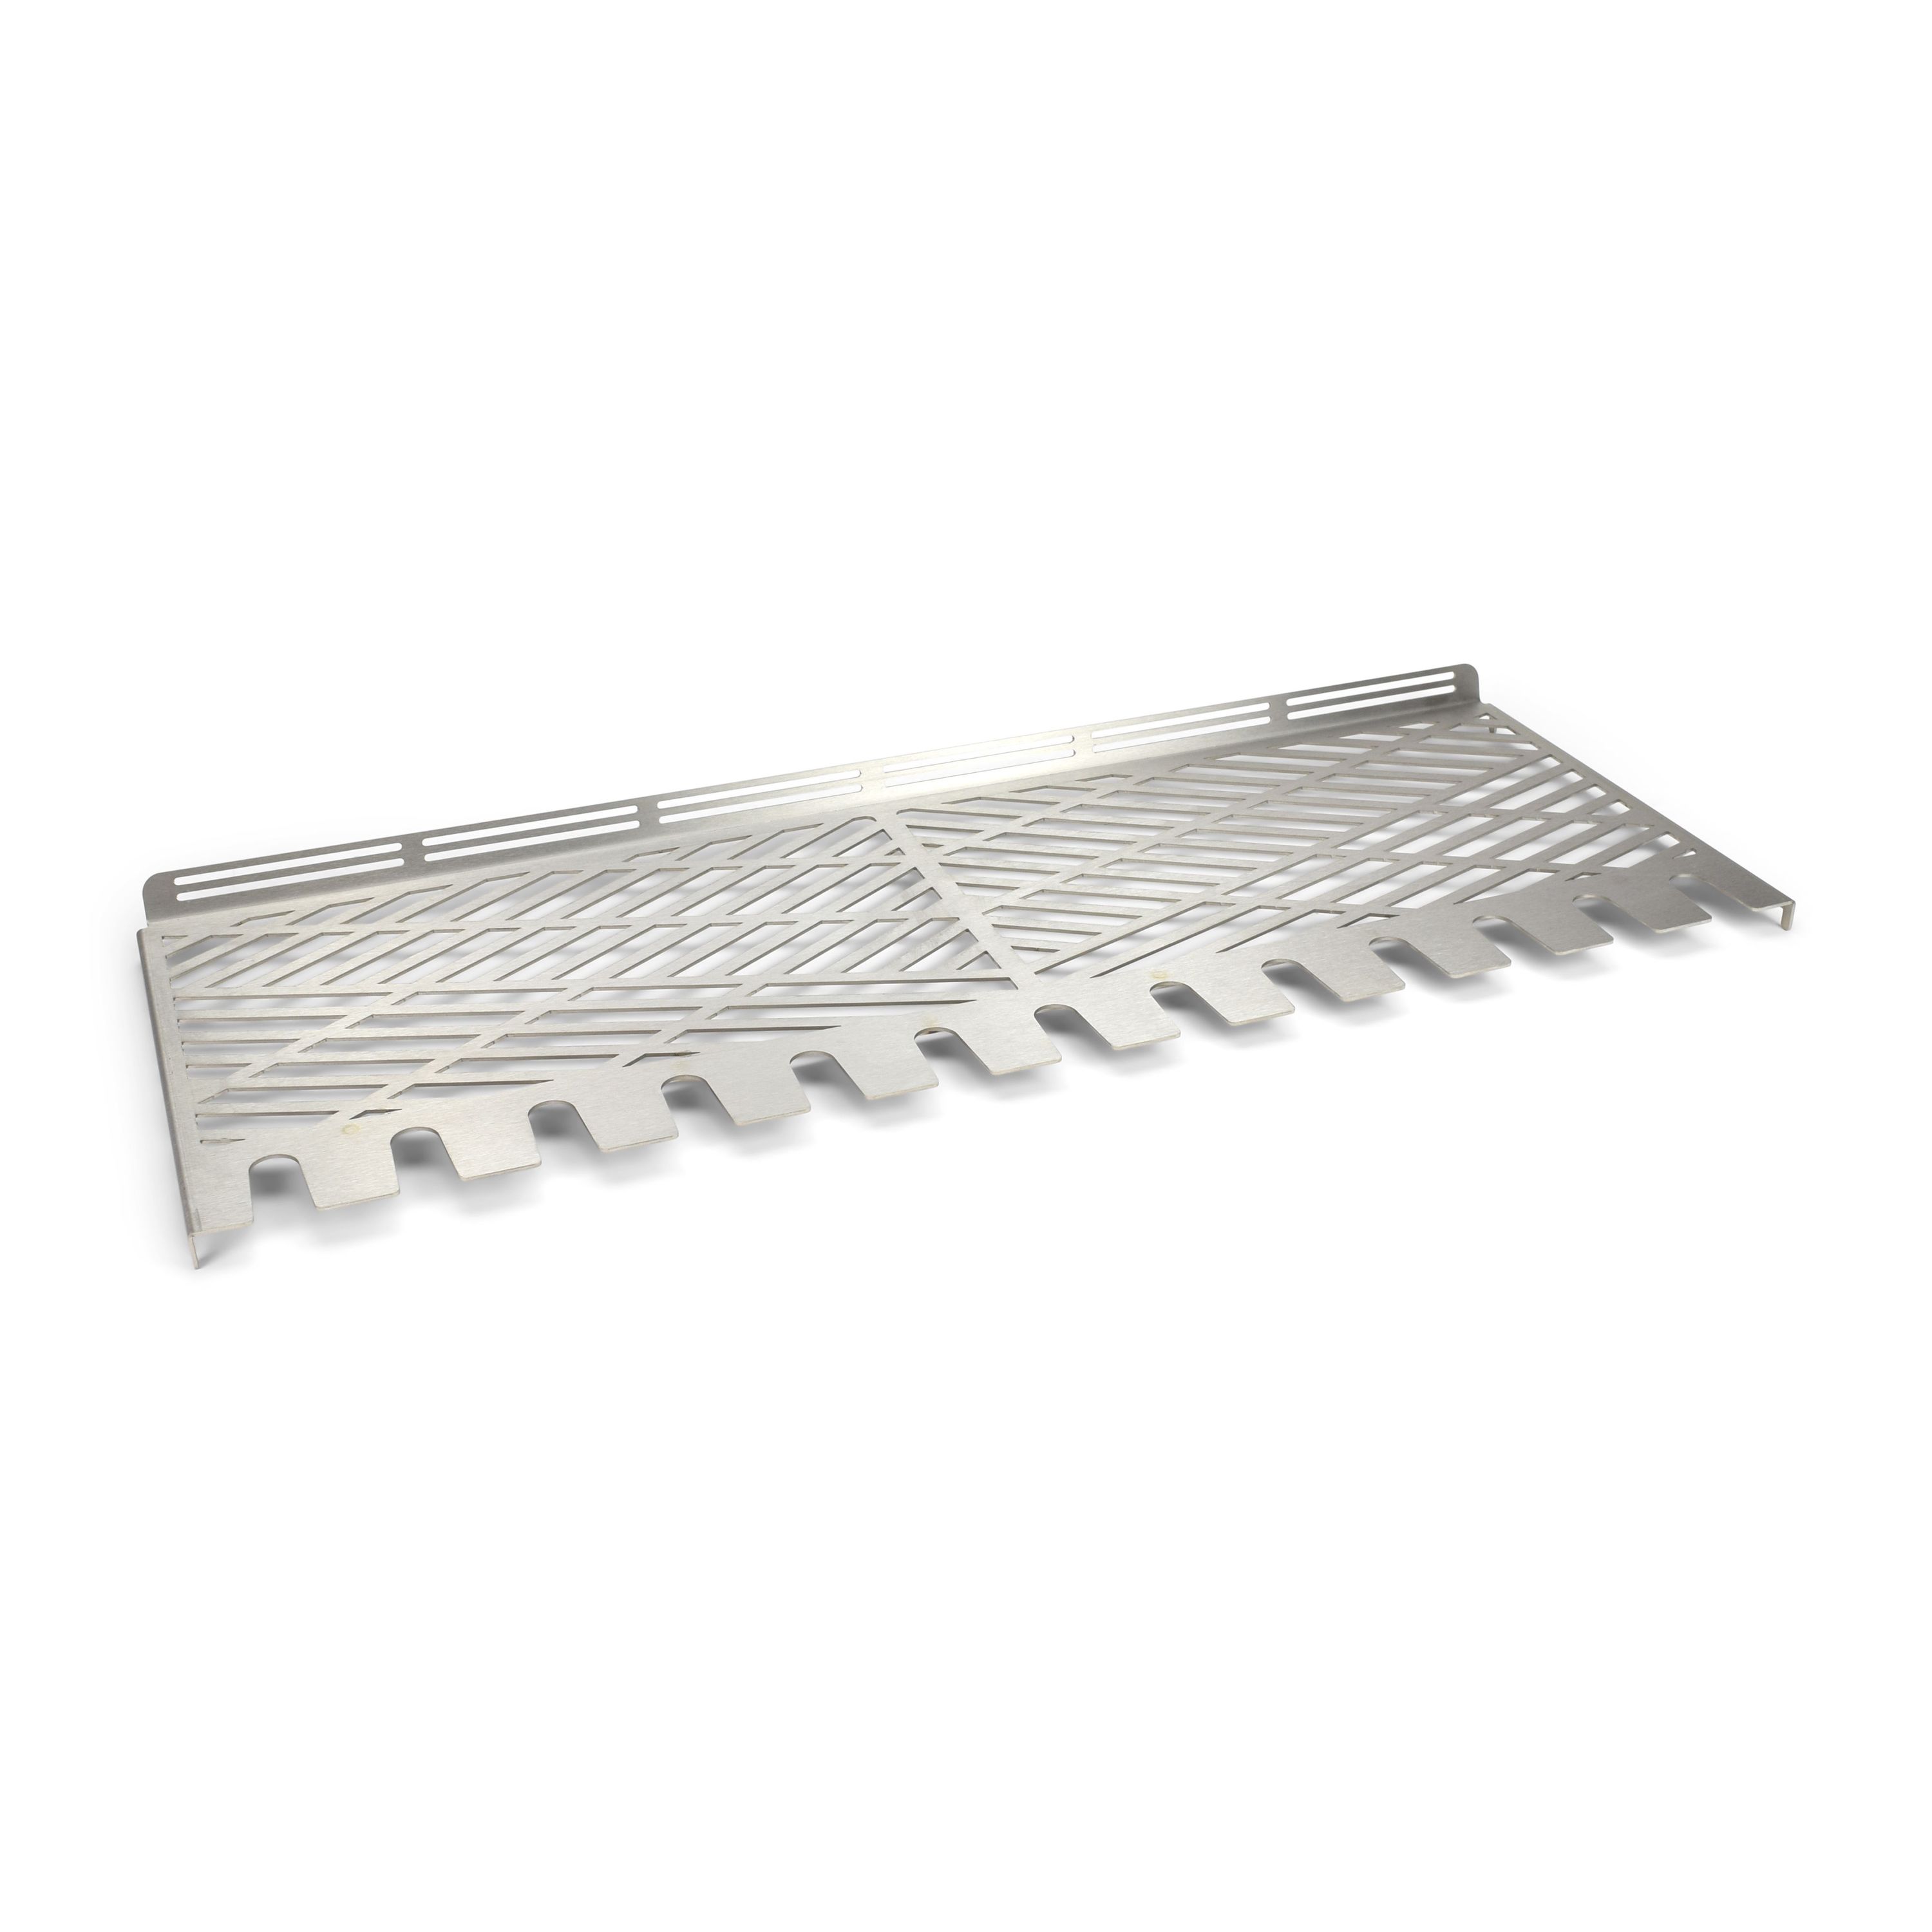 Stainless steel warming grid suitable for Traeger pellet grill